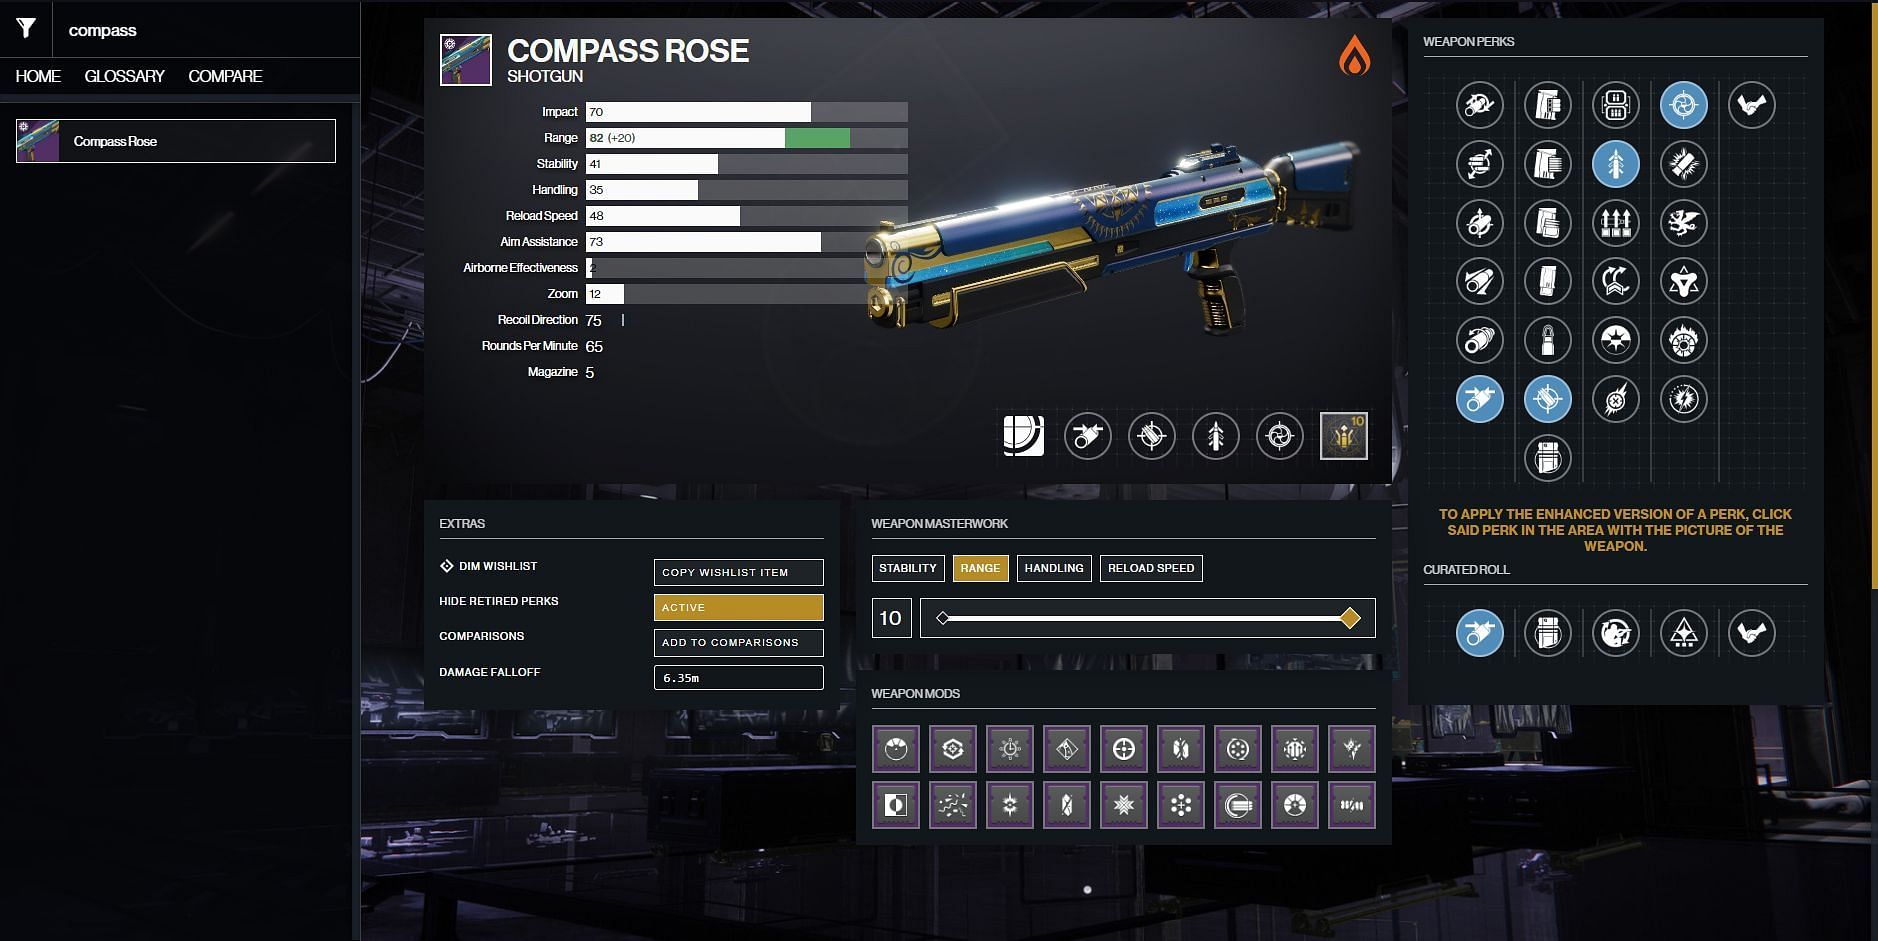 PvP god roll for Compass Rose (Image via Bungie)